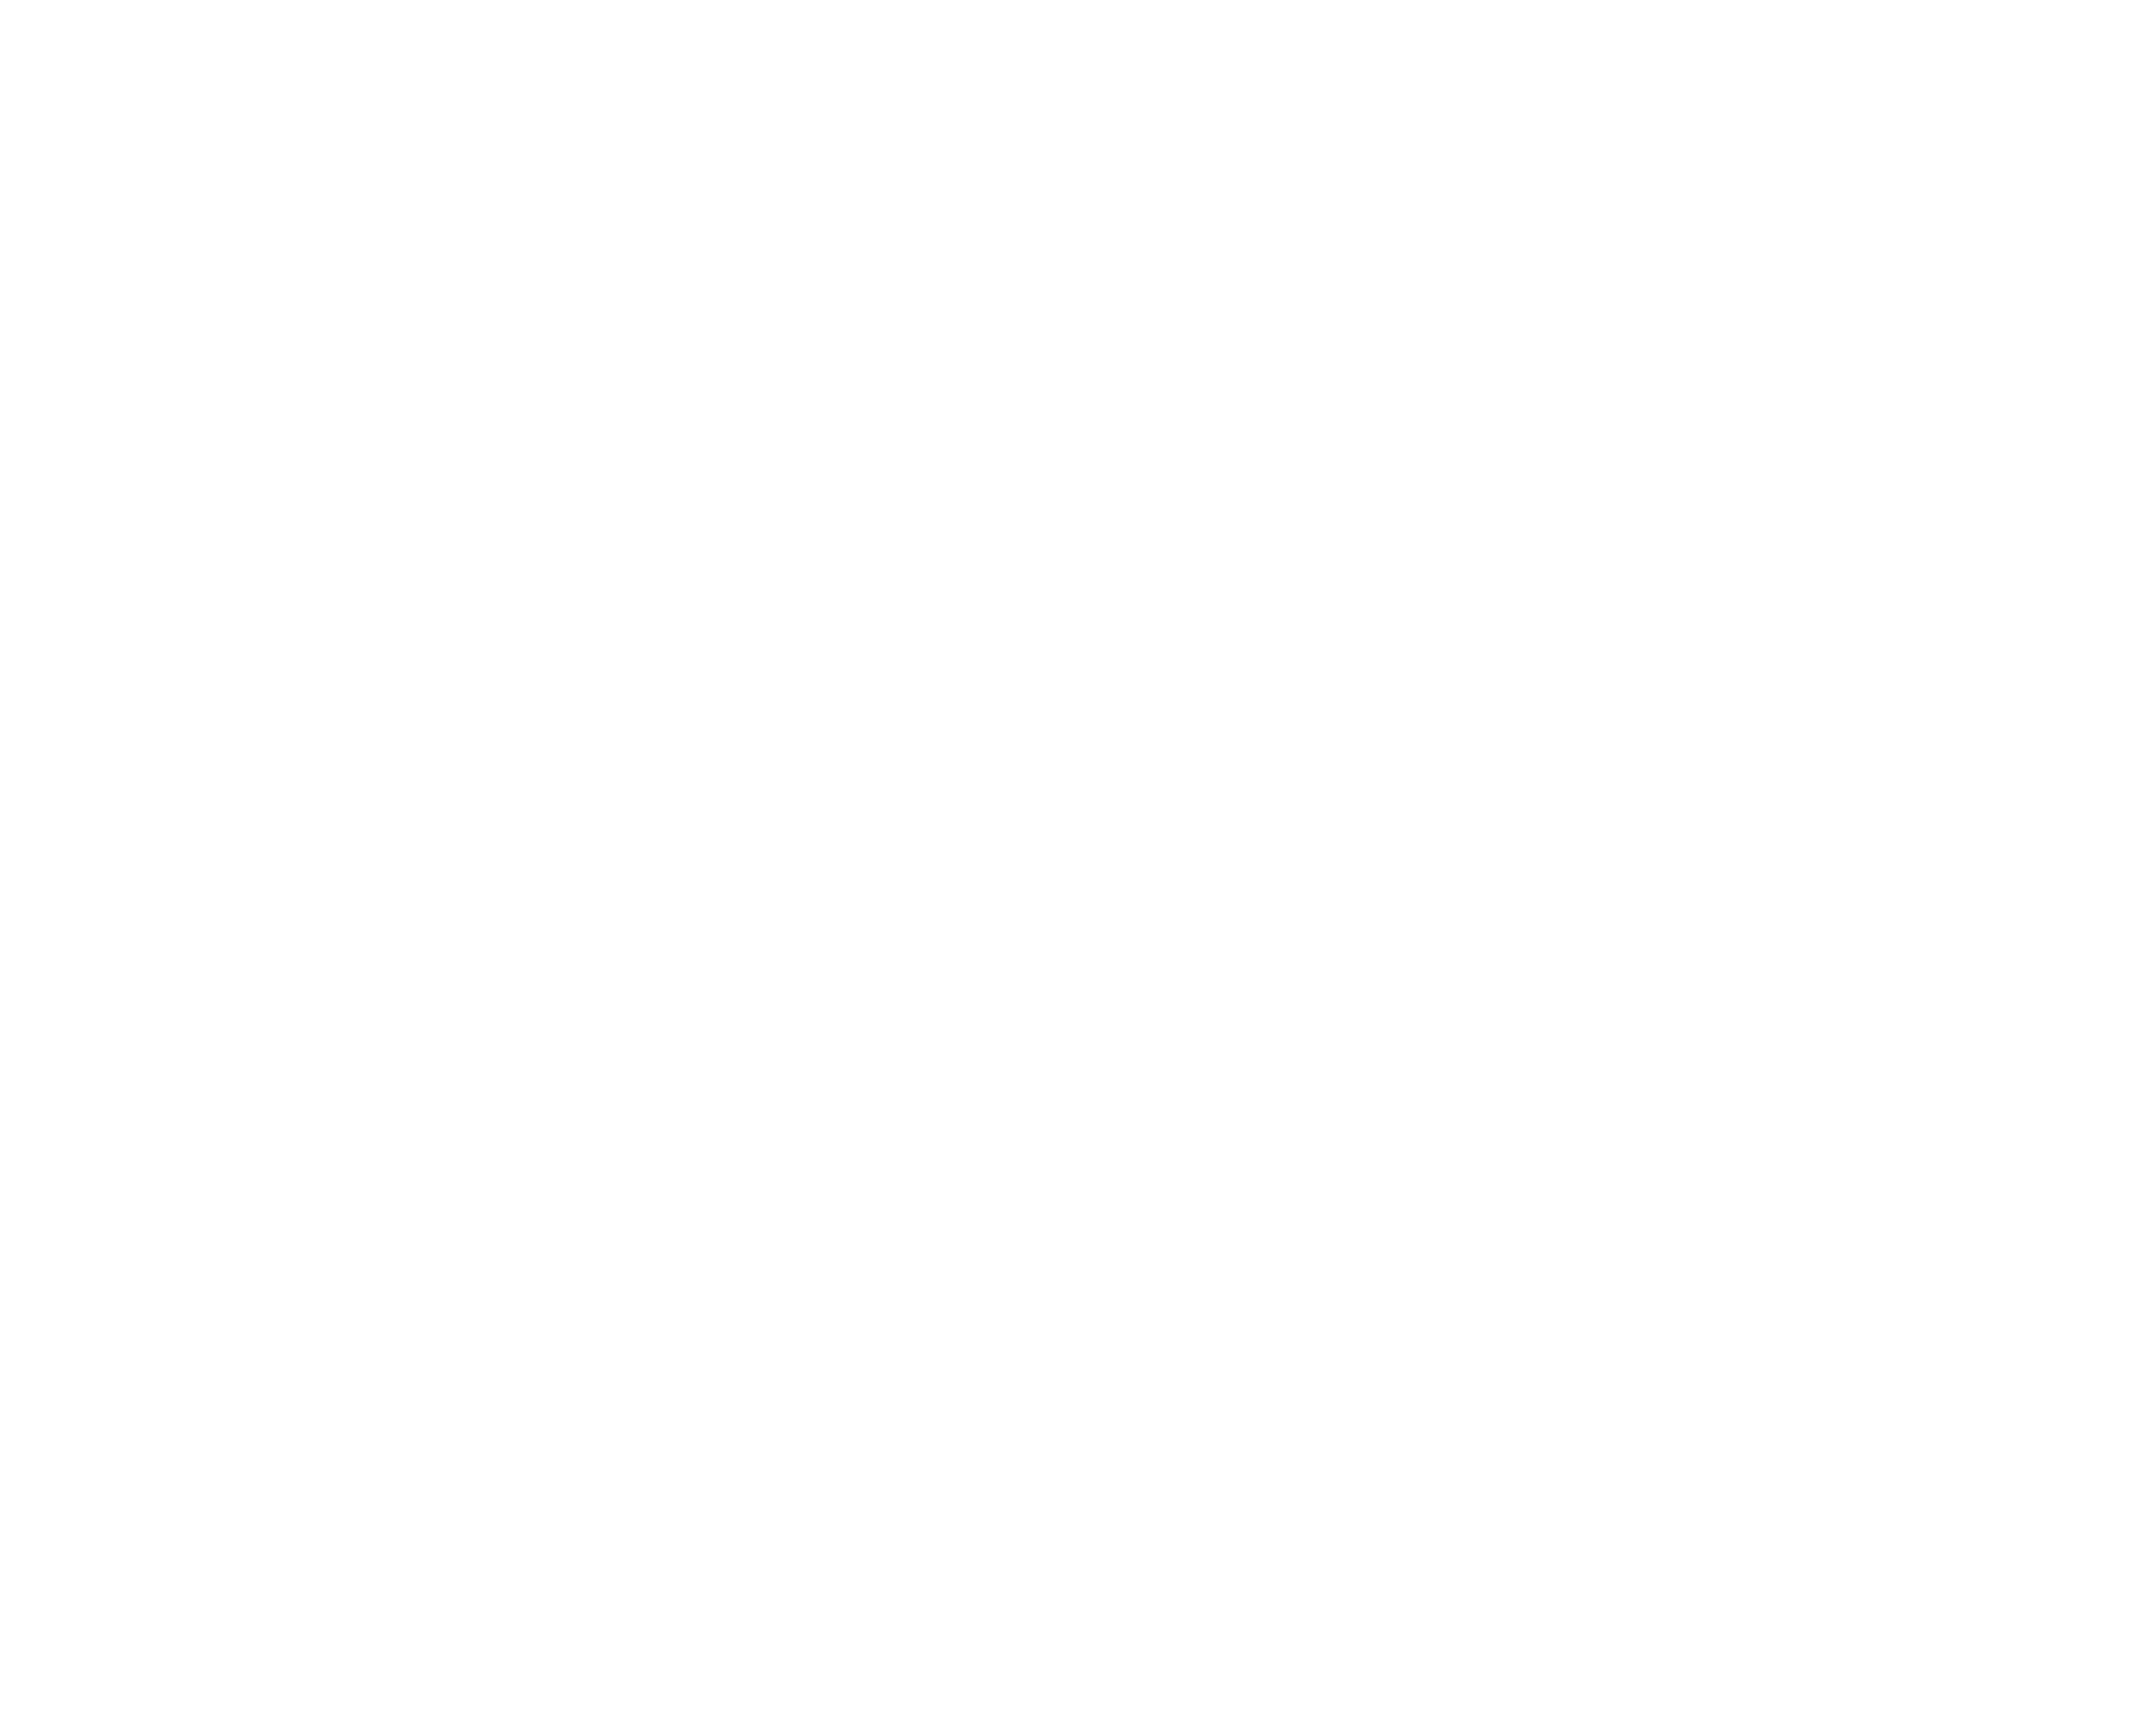 Oltime Network Inc